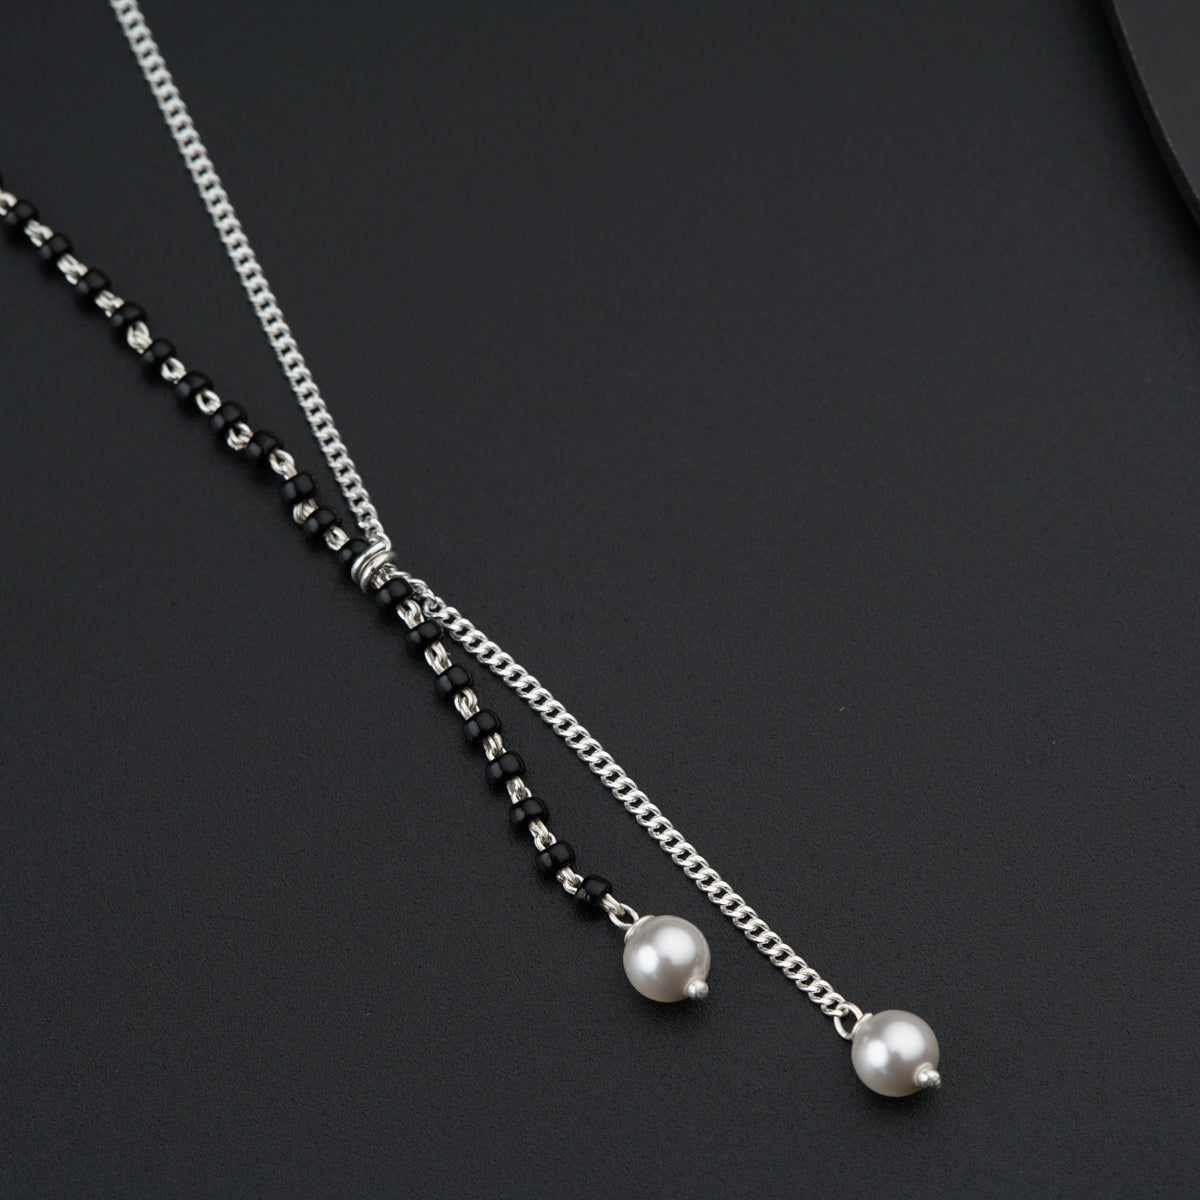 Handmade Silver Mangalsutra with Pearls